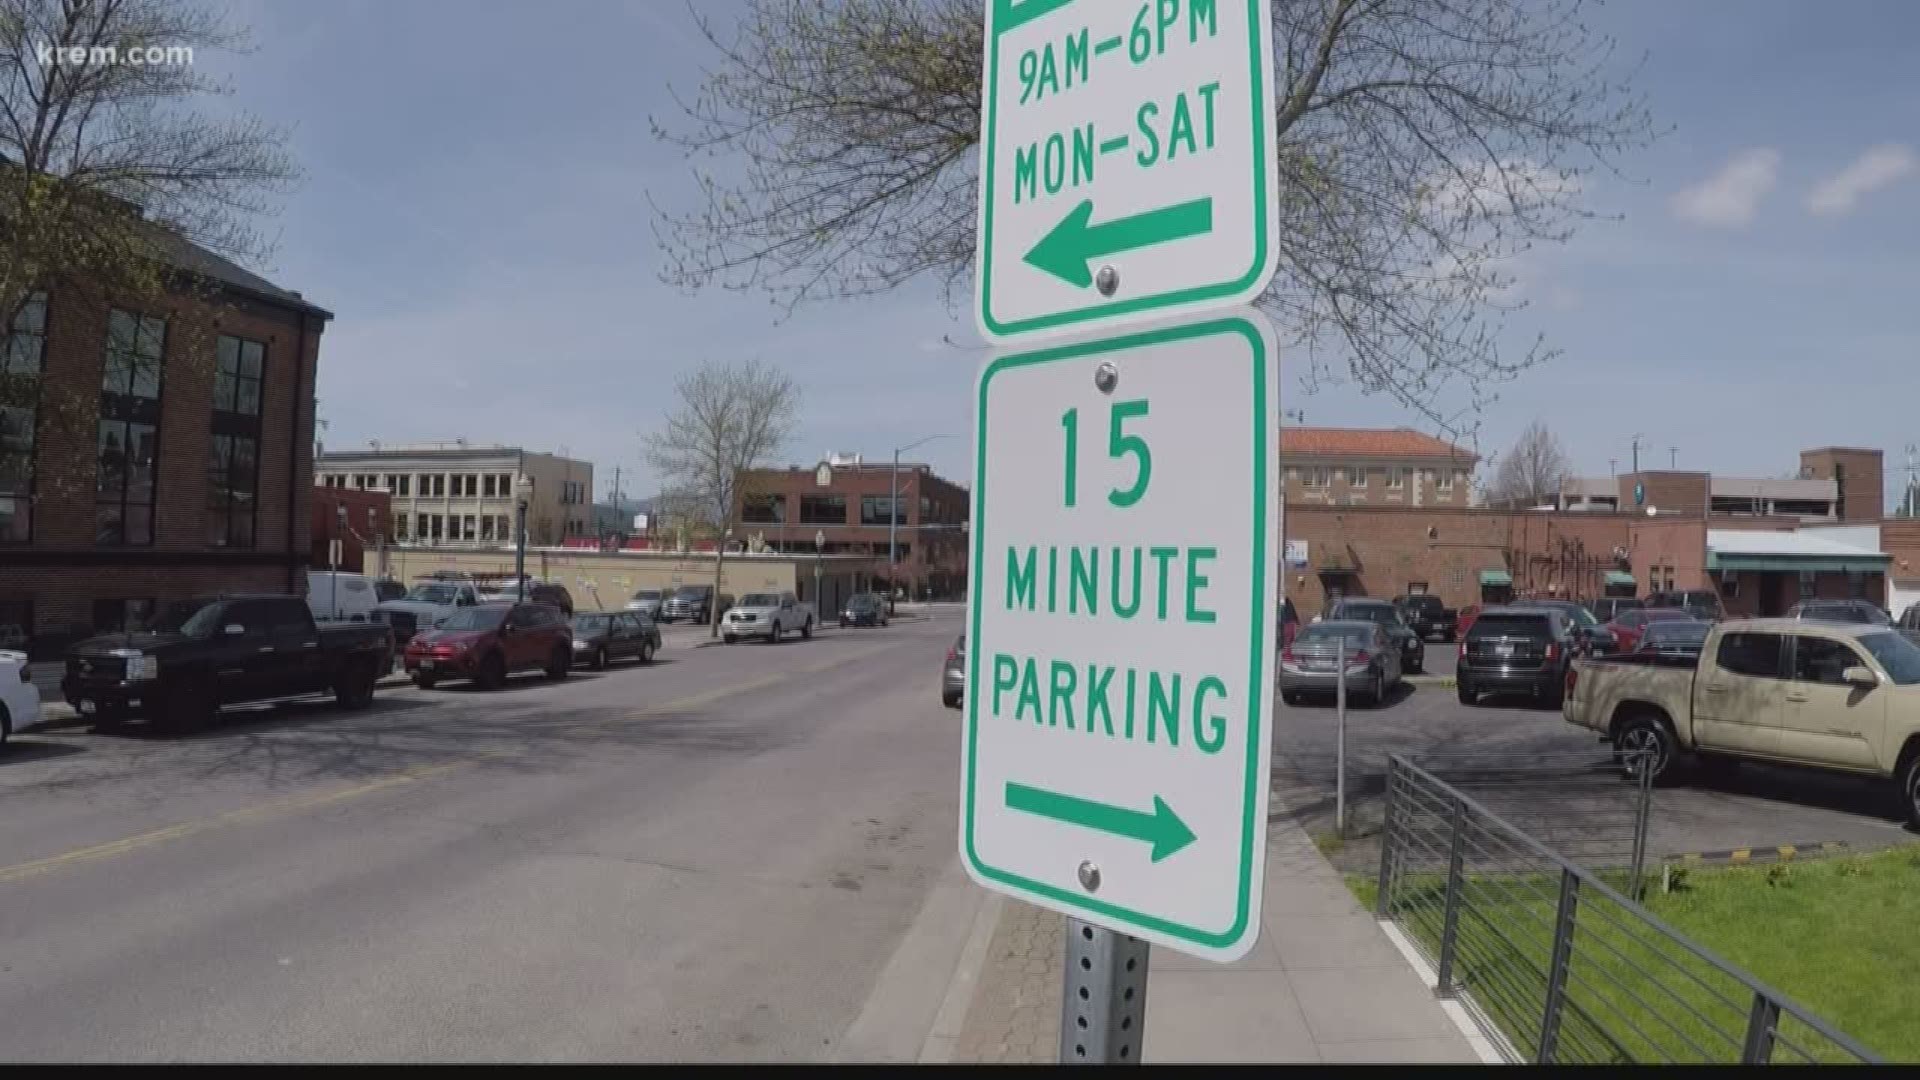 Dubbed "Park My Ride," the app prototype uses a camera to identify open parking spaces and then transmit that information in real time to users.